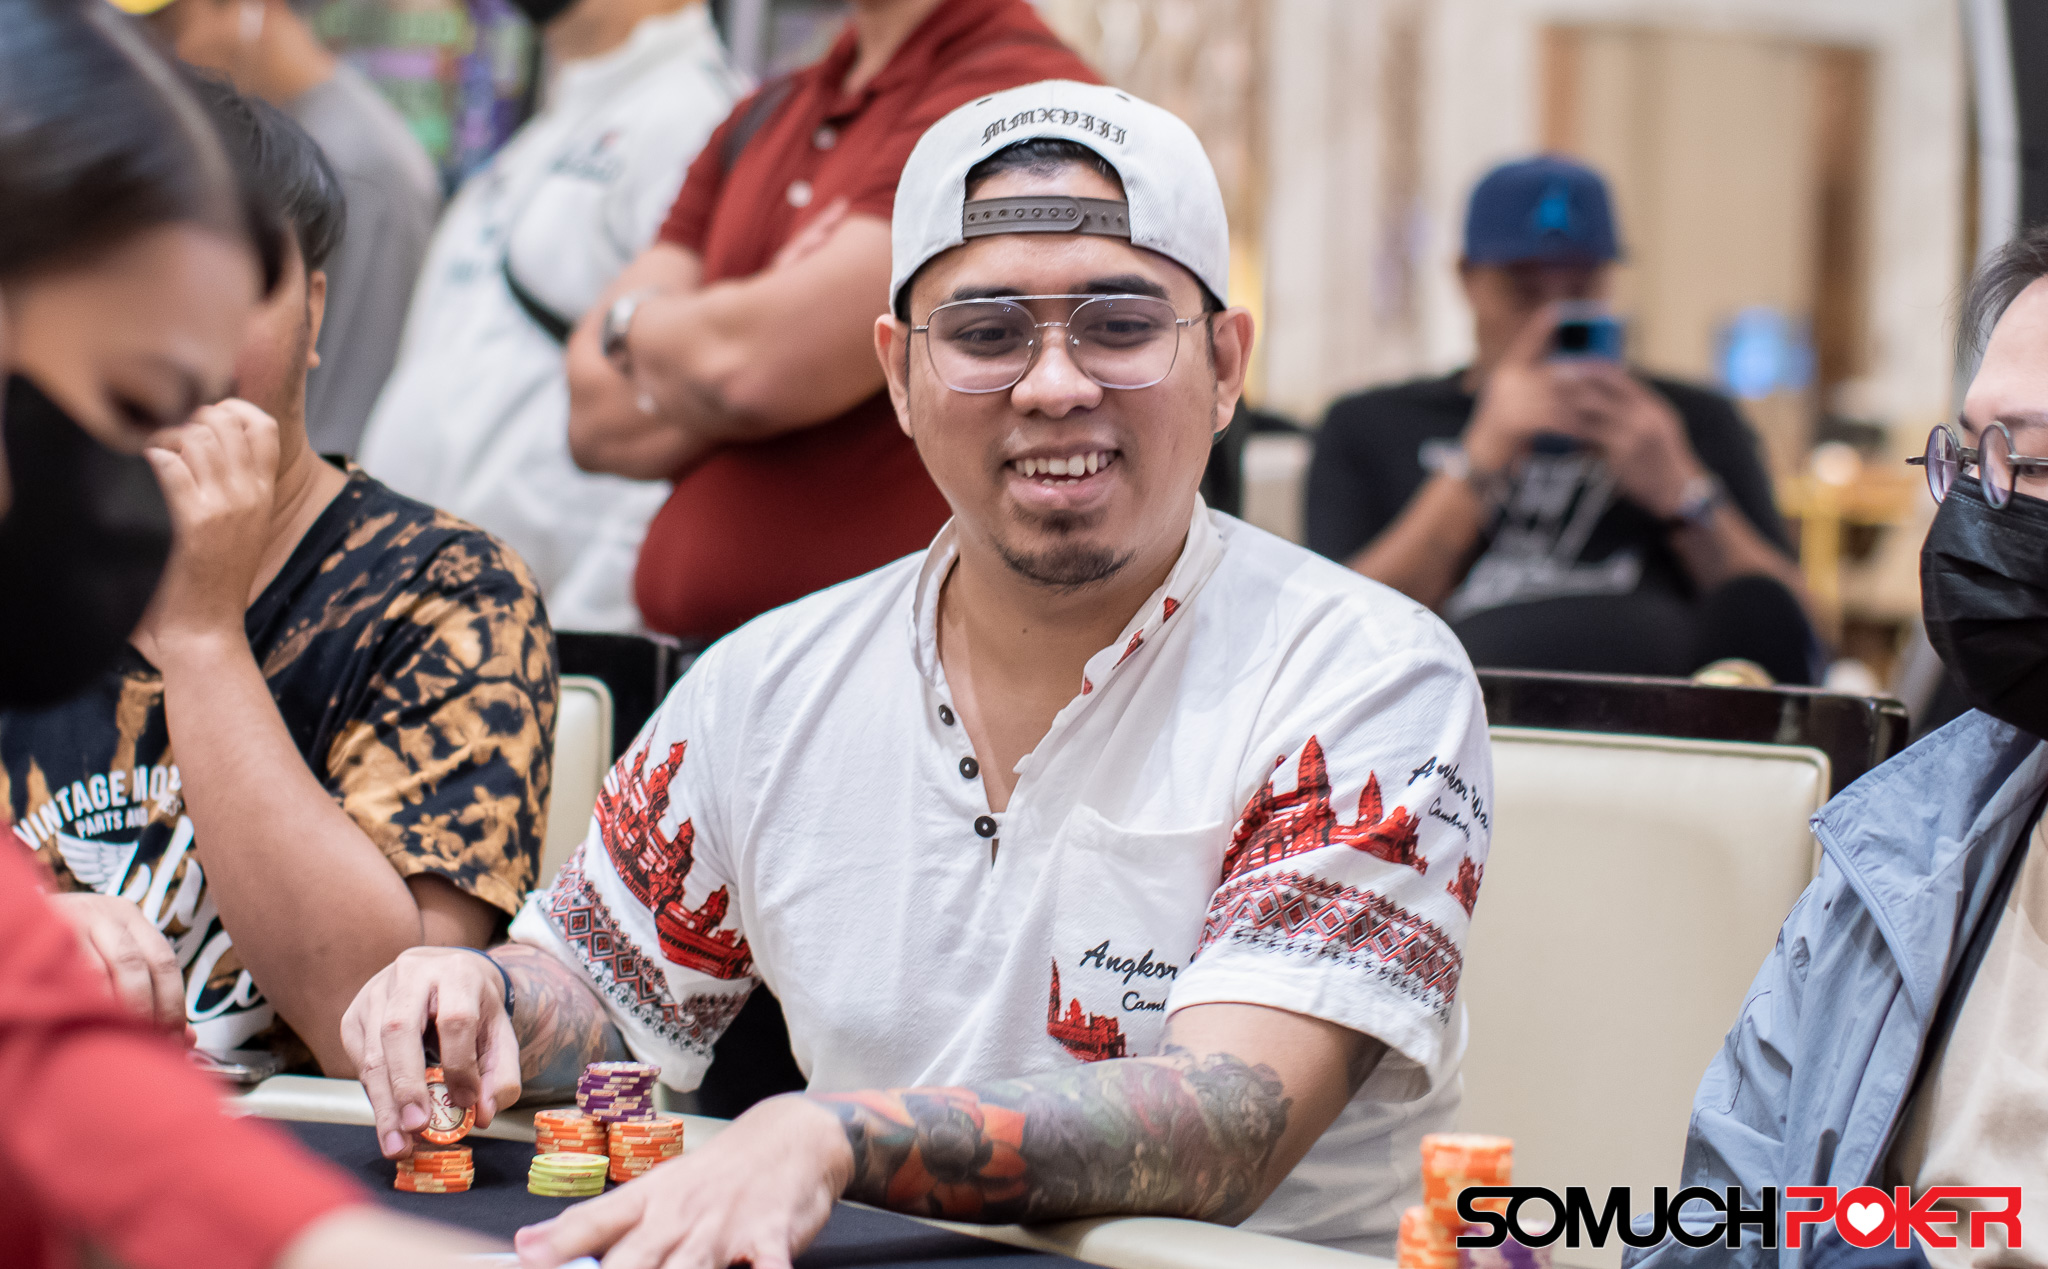 Poker Dream Manila opens with PH₱ 4.1 Million Warm Up prize pool; 48 advance to Final Day led by David Erquiaga